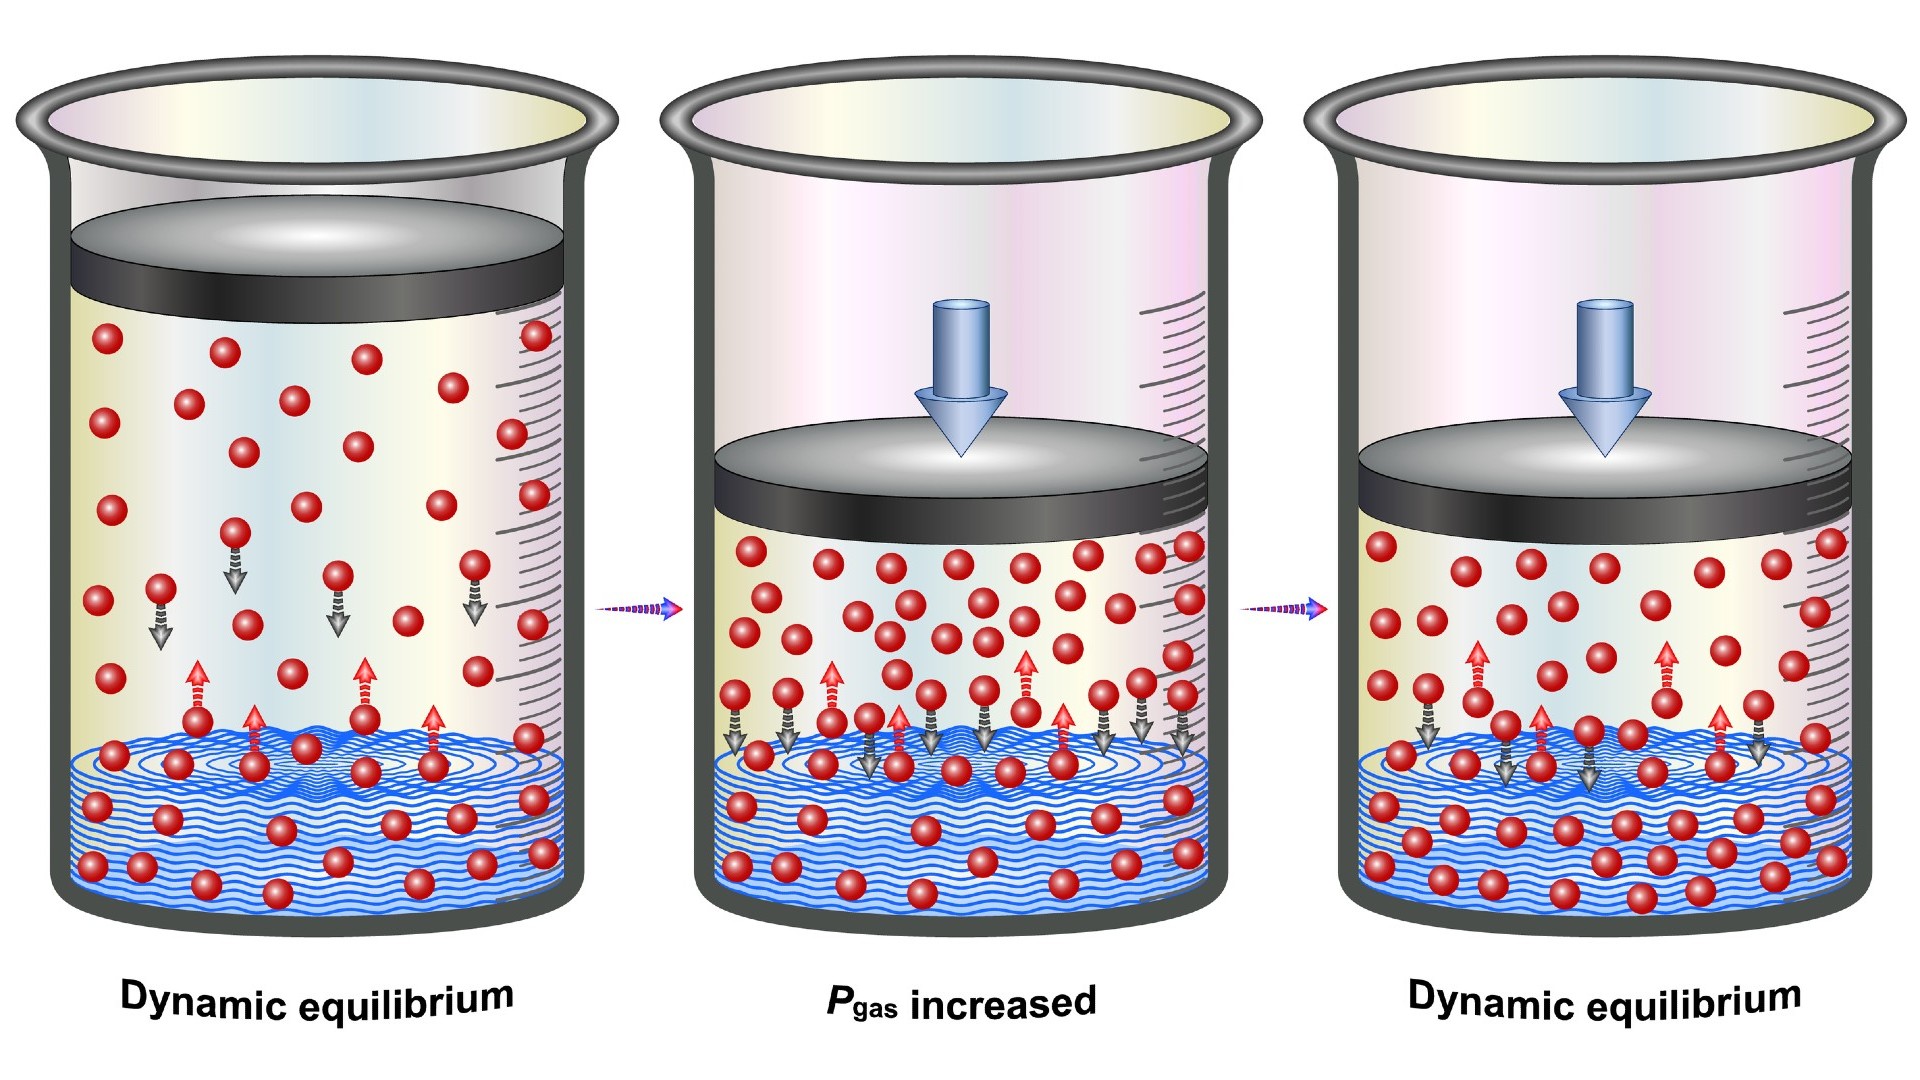 An illustration of the effect of pressure on the solubility of gases (known as Henry's Law). There are 3 containers. The first container shows dynamic equilibrium - it is filled to the brim with liquid, has a lid and the gas particles are evenly distributed. The second container shows an increase in gas pressure - the lid is now halfway up the container and the gas particles are tightly packed together in the liquid. The third container shows dynamic equilibrium again - the lid is halfway up the container and the number of gas particles is now fewer and evenly distributed again.